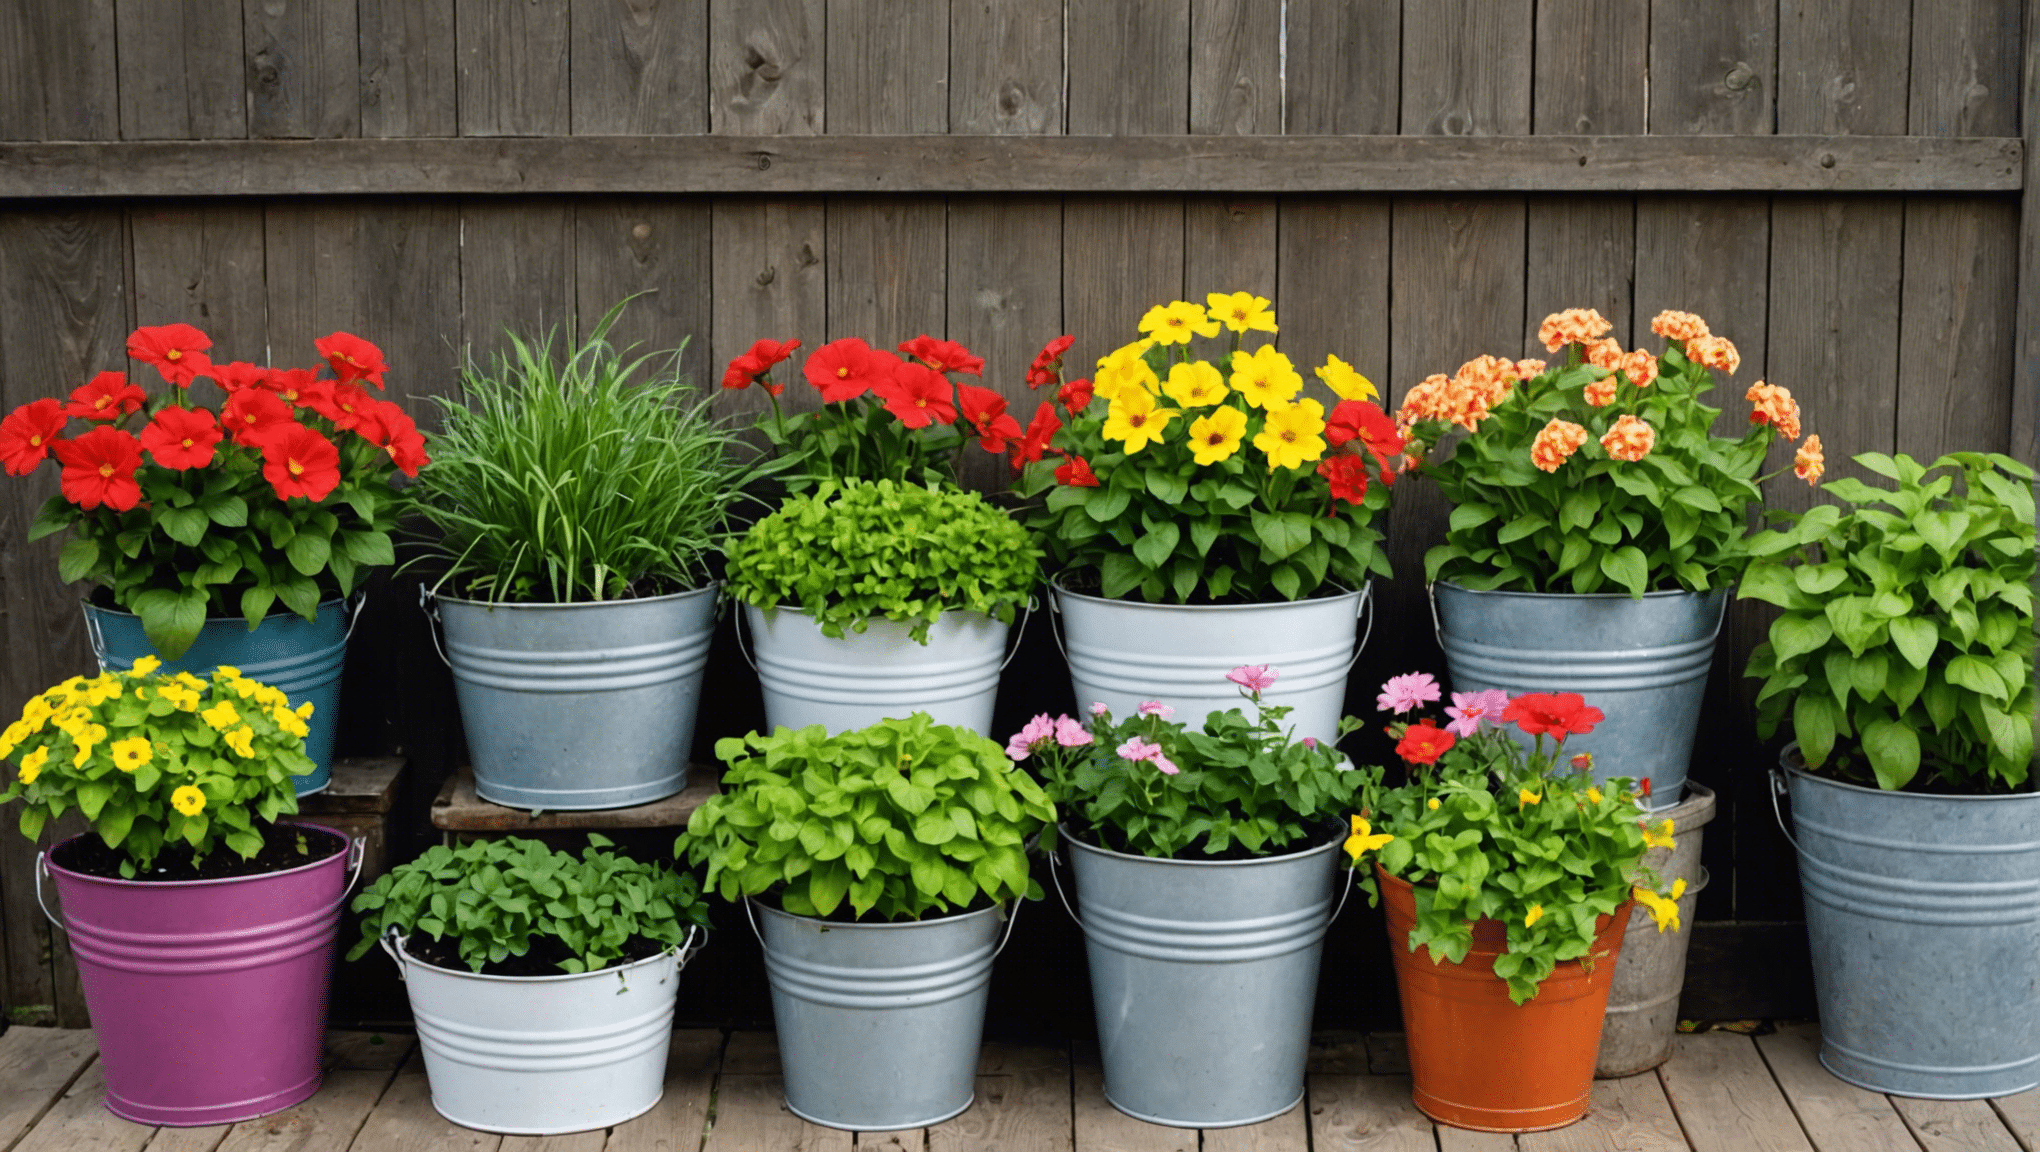 discover innovative and creative bucket gardening ideas for your next gardening project.